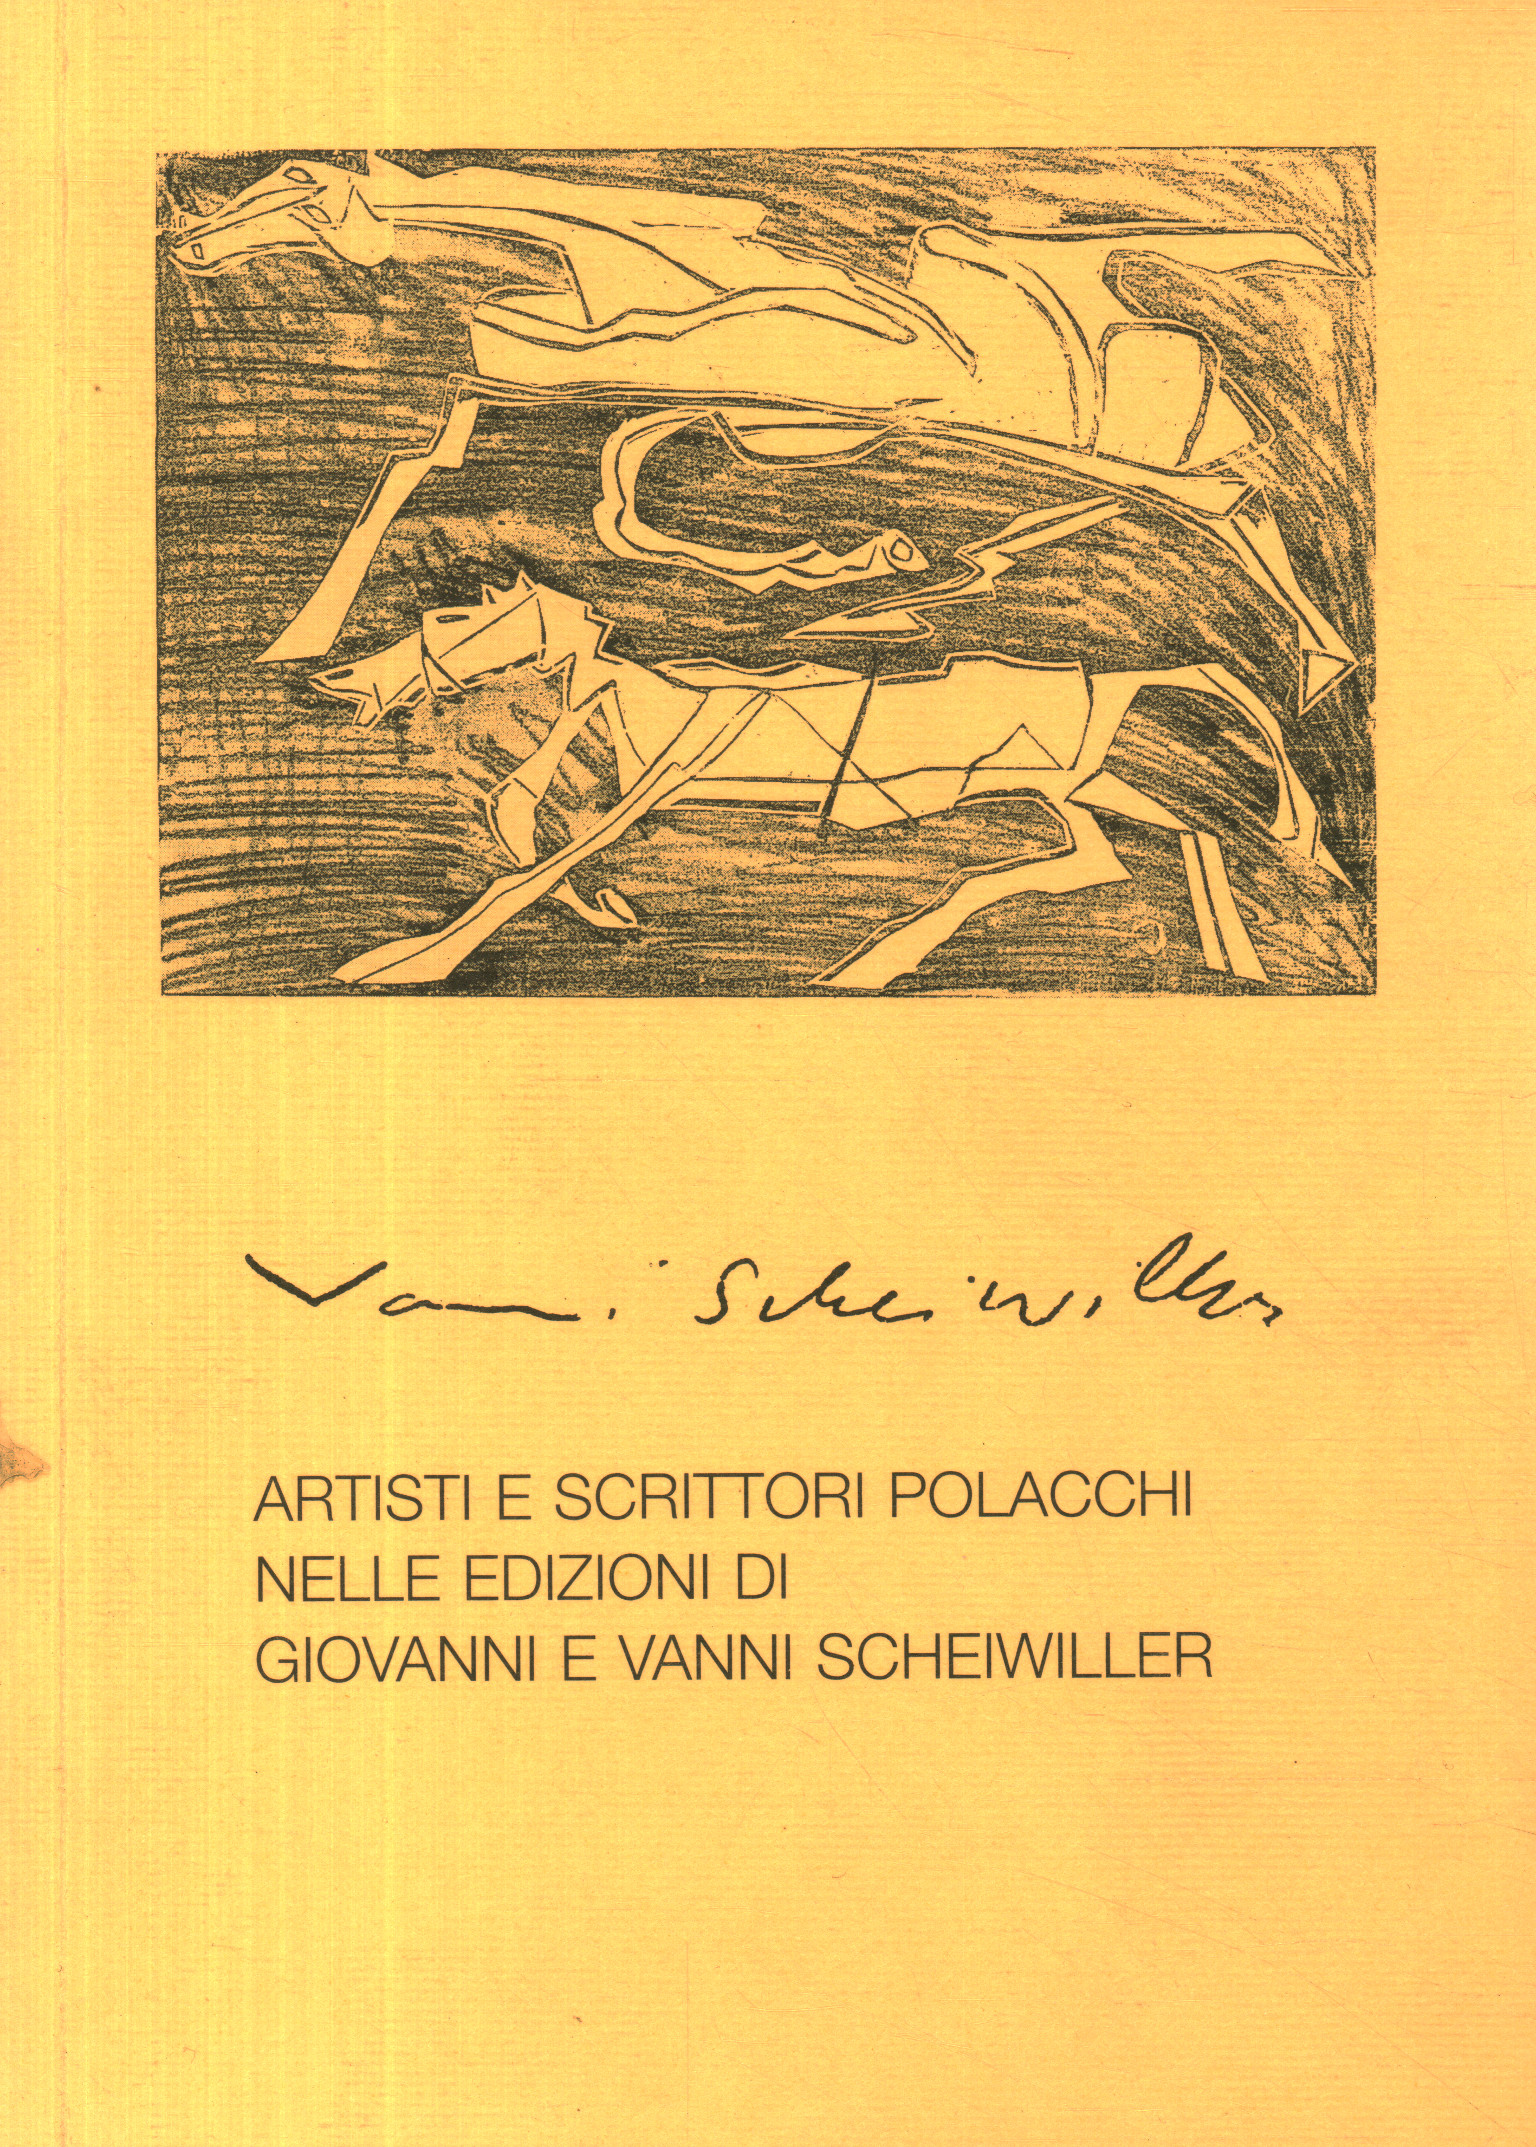 Polish artists and writers in the editions